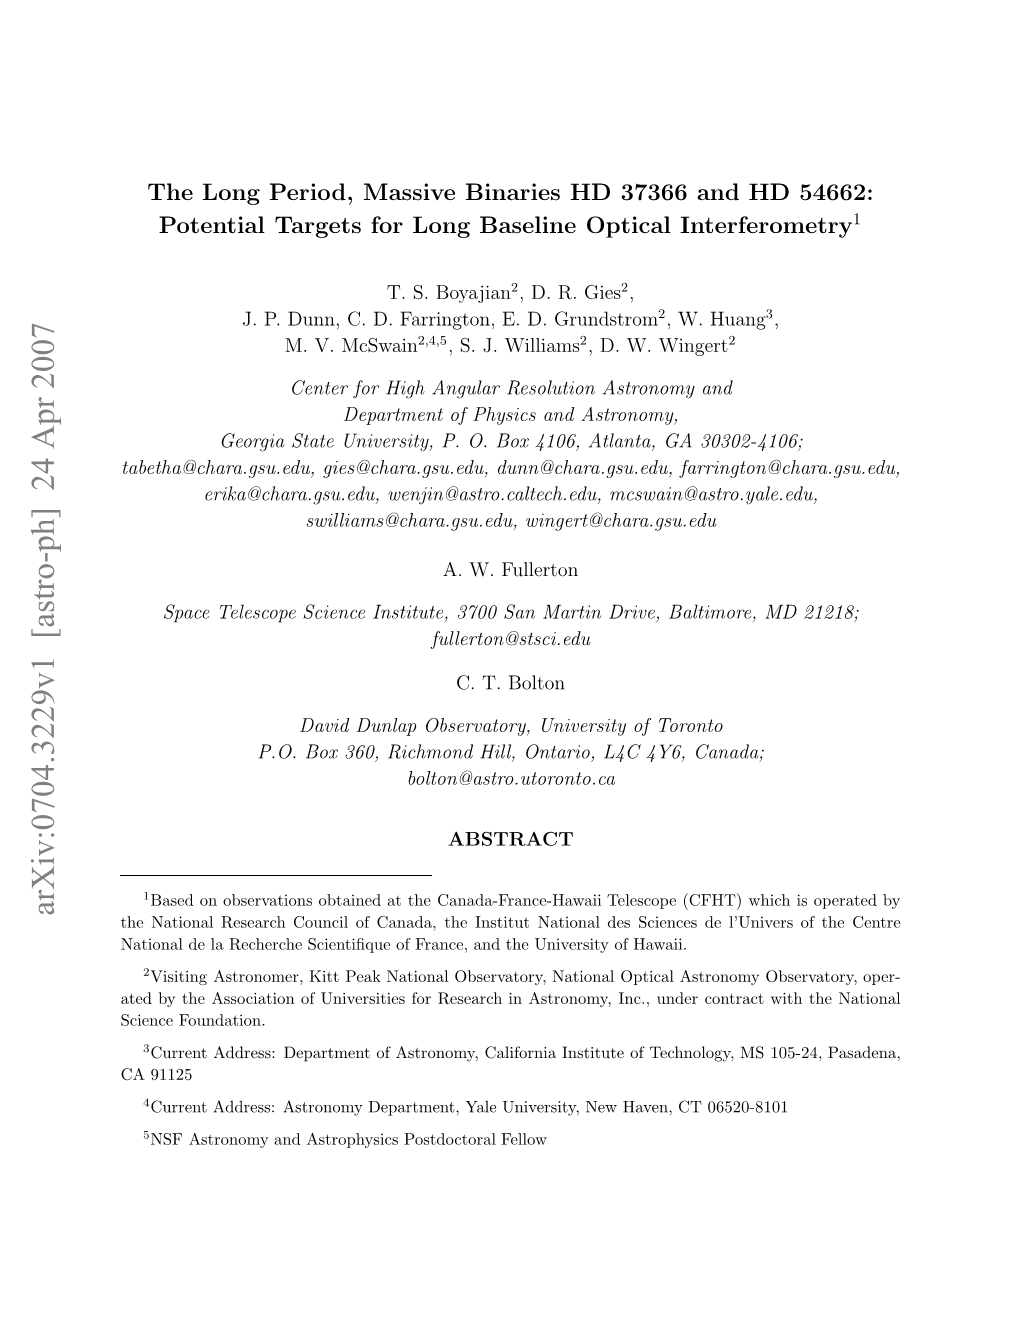 The Long Period, Massive Binaries HD 37366 and HD 54662: Potential Targets for Long Baseline Optical Interferometry